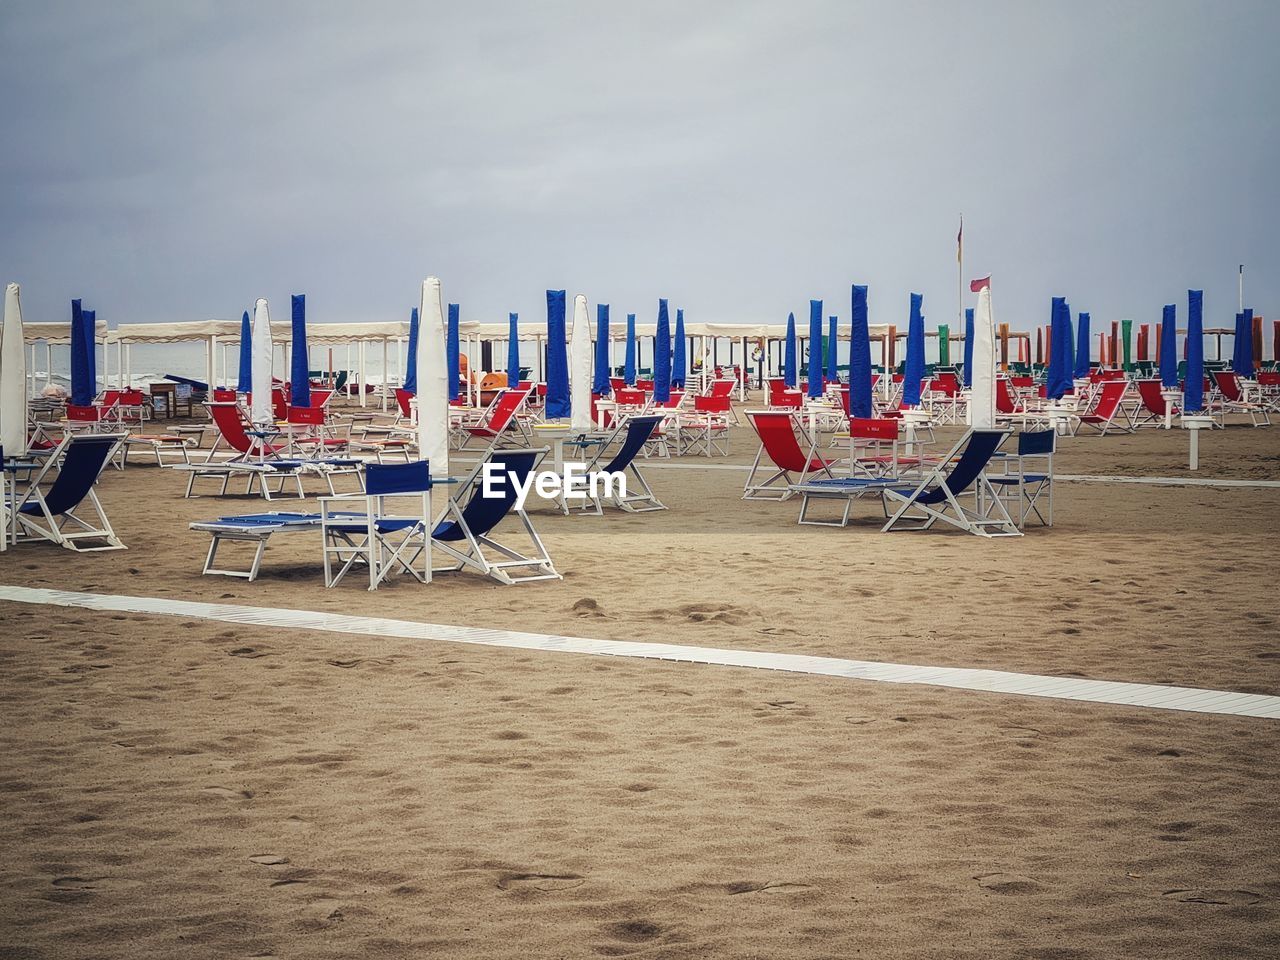 LOUNGE CHAIRS ON BEACH AGAINST SKY